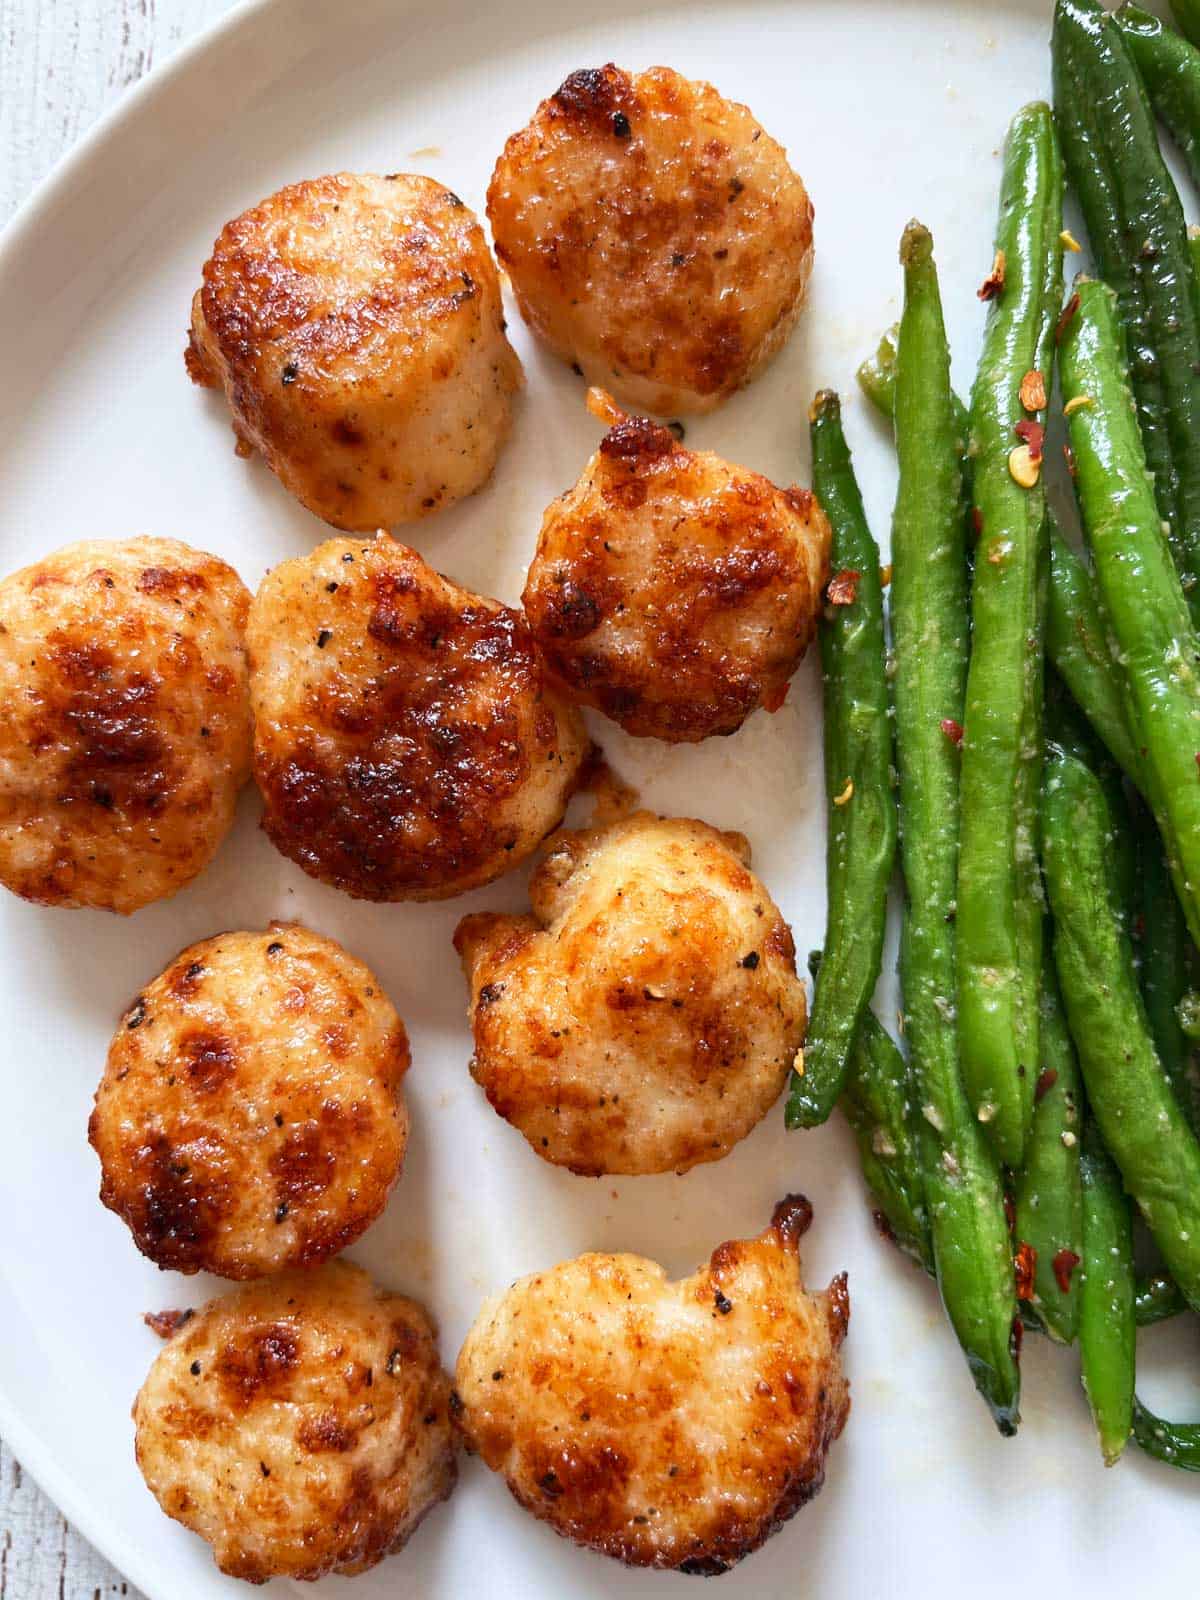 Broiled scallops are served with green beans.